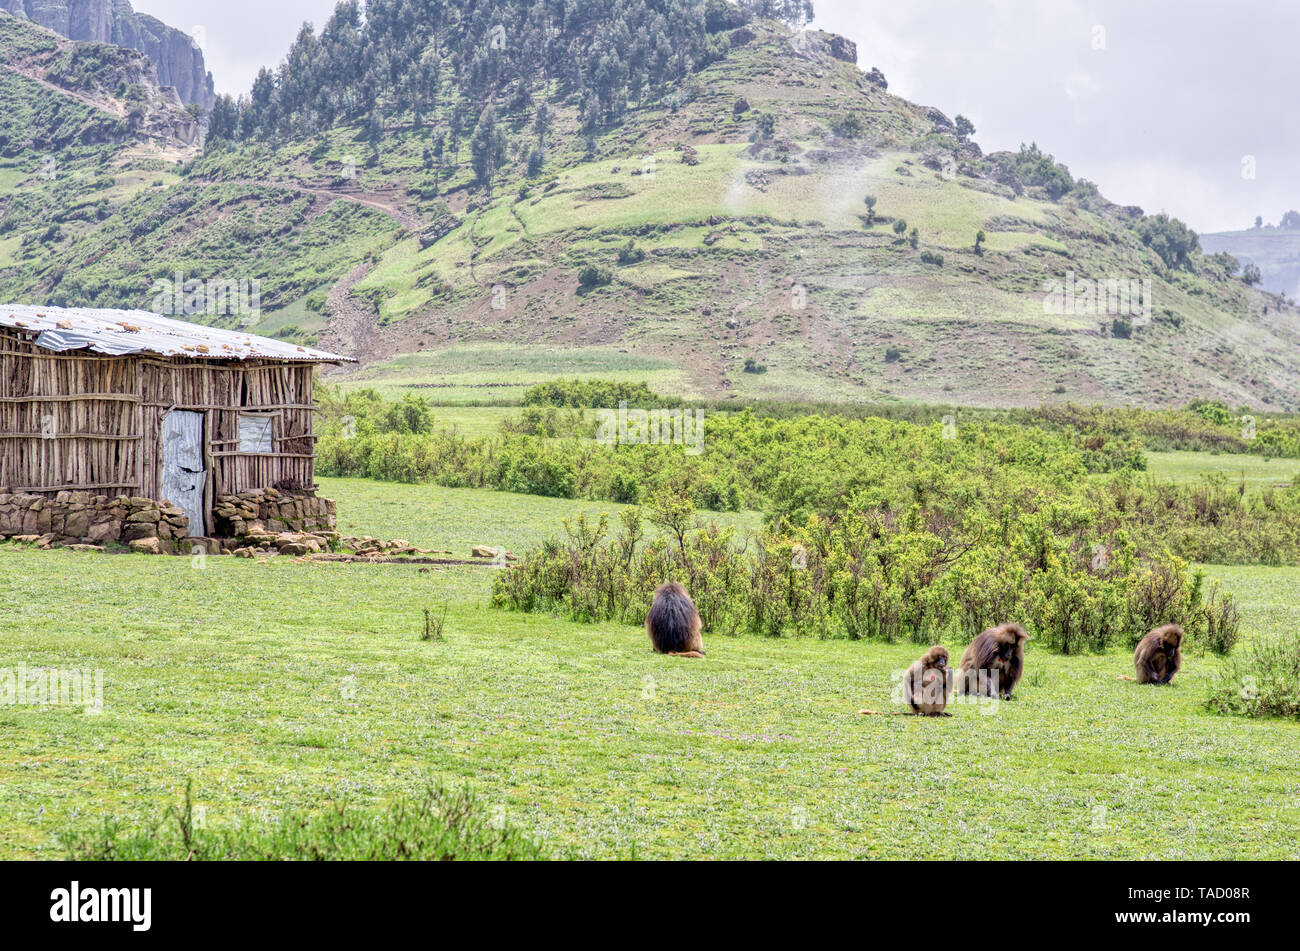 Gelada monkeys in the Simien Mountains north of Ethiopia feeding on the grass that grows next to a barn of rustic wooden slats with the mountains in t Stock Photo